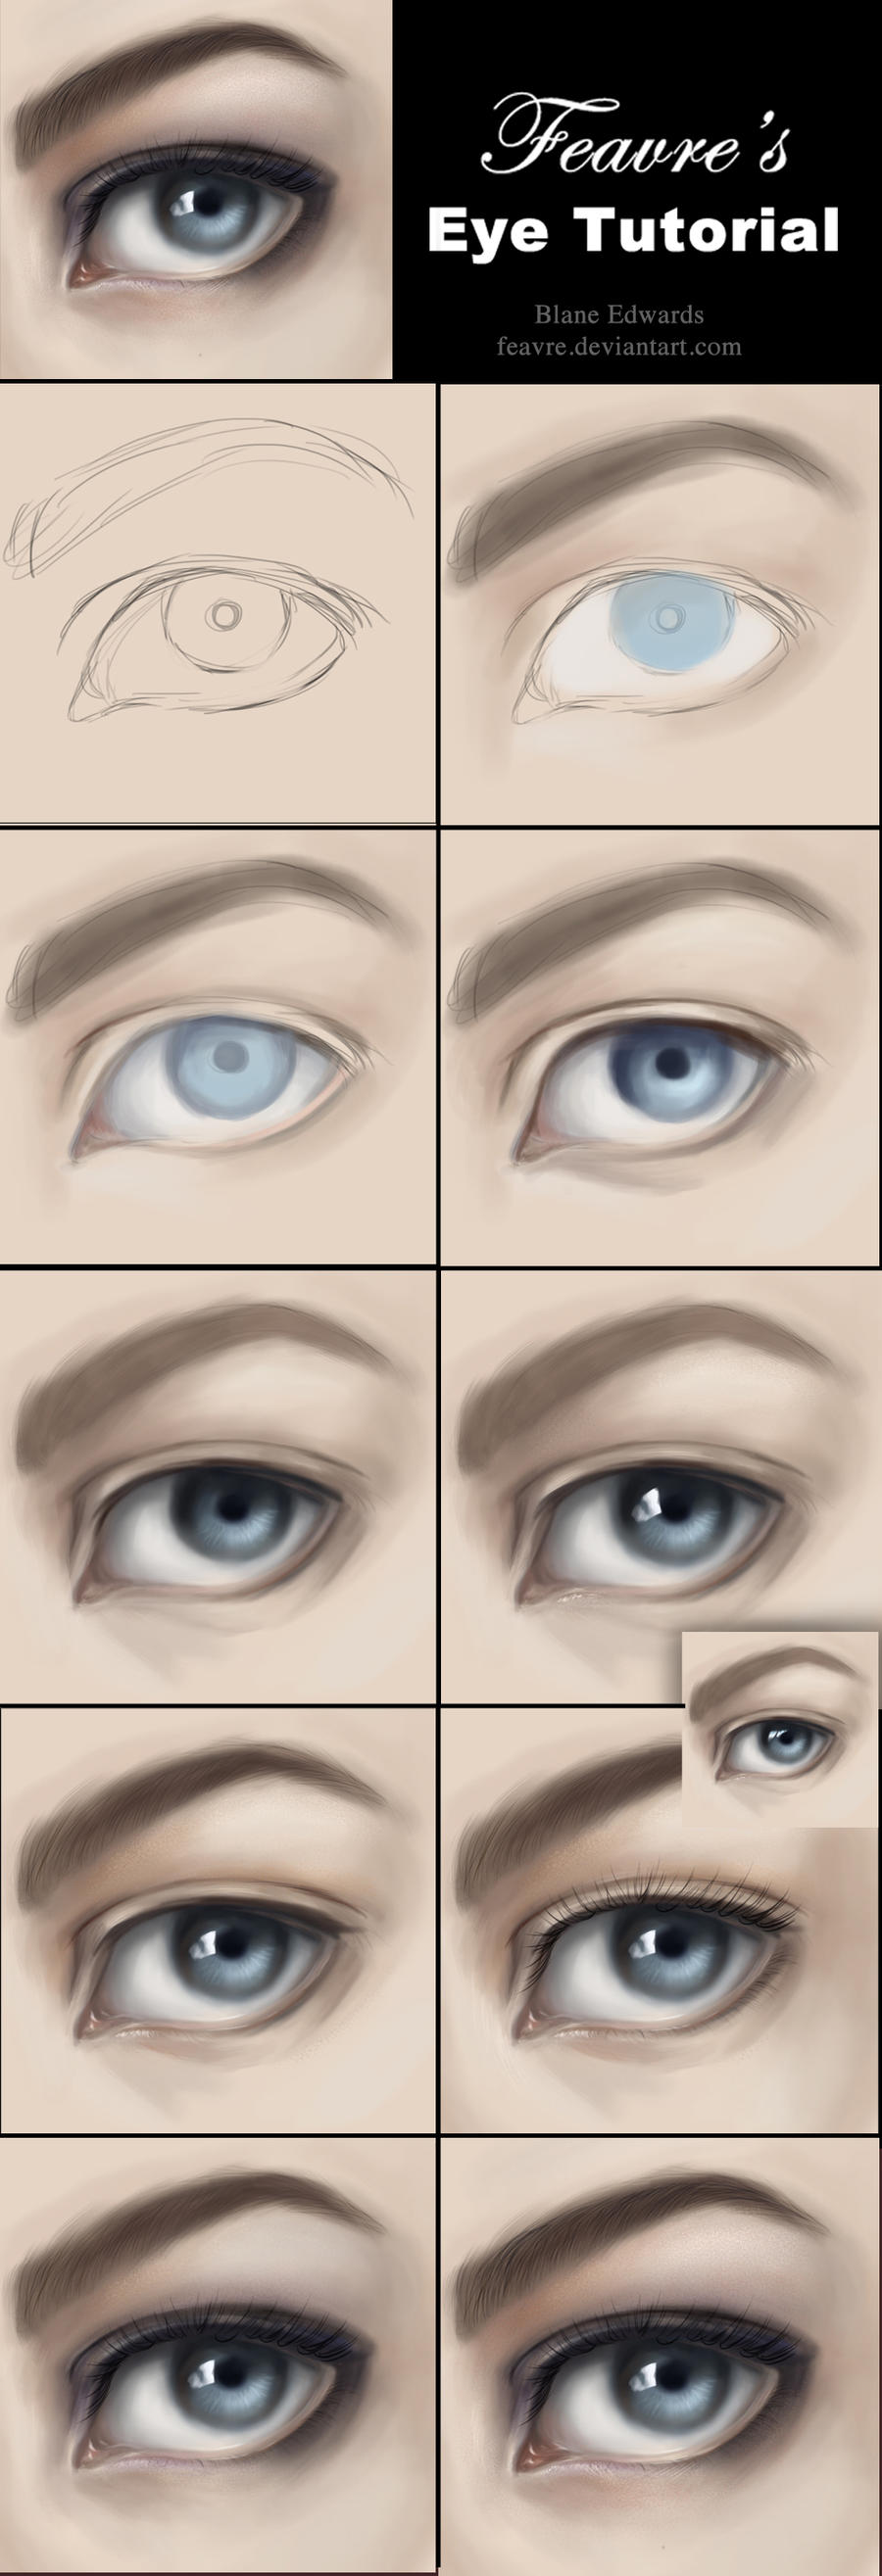 How to Paint Realistic Eyes Tutorial